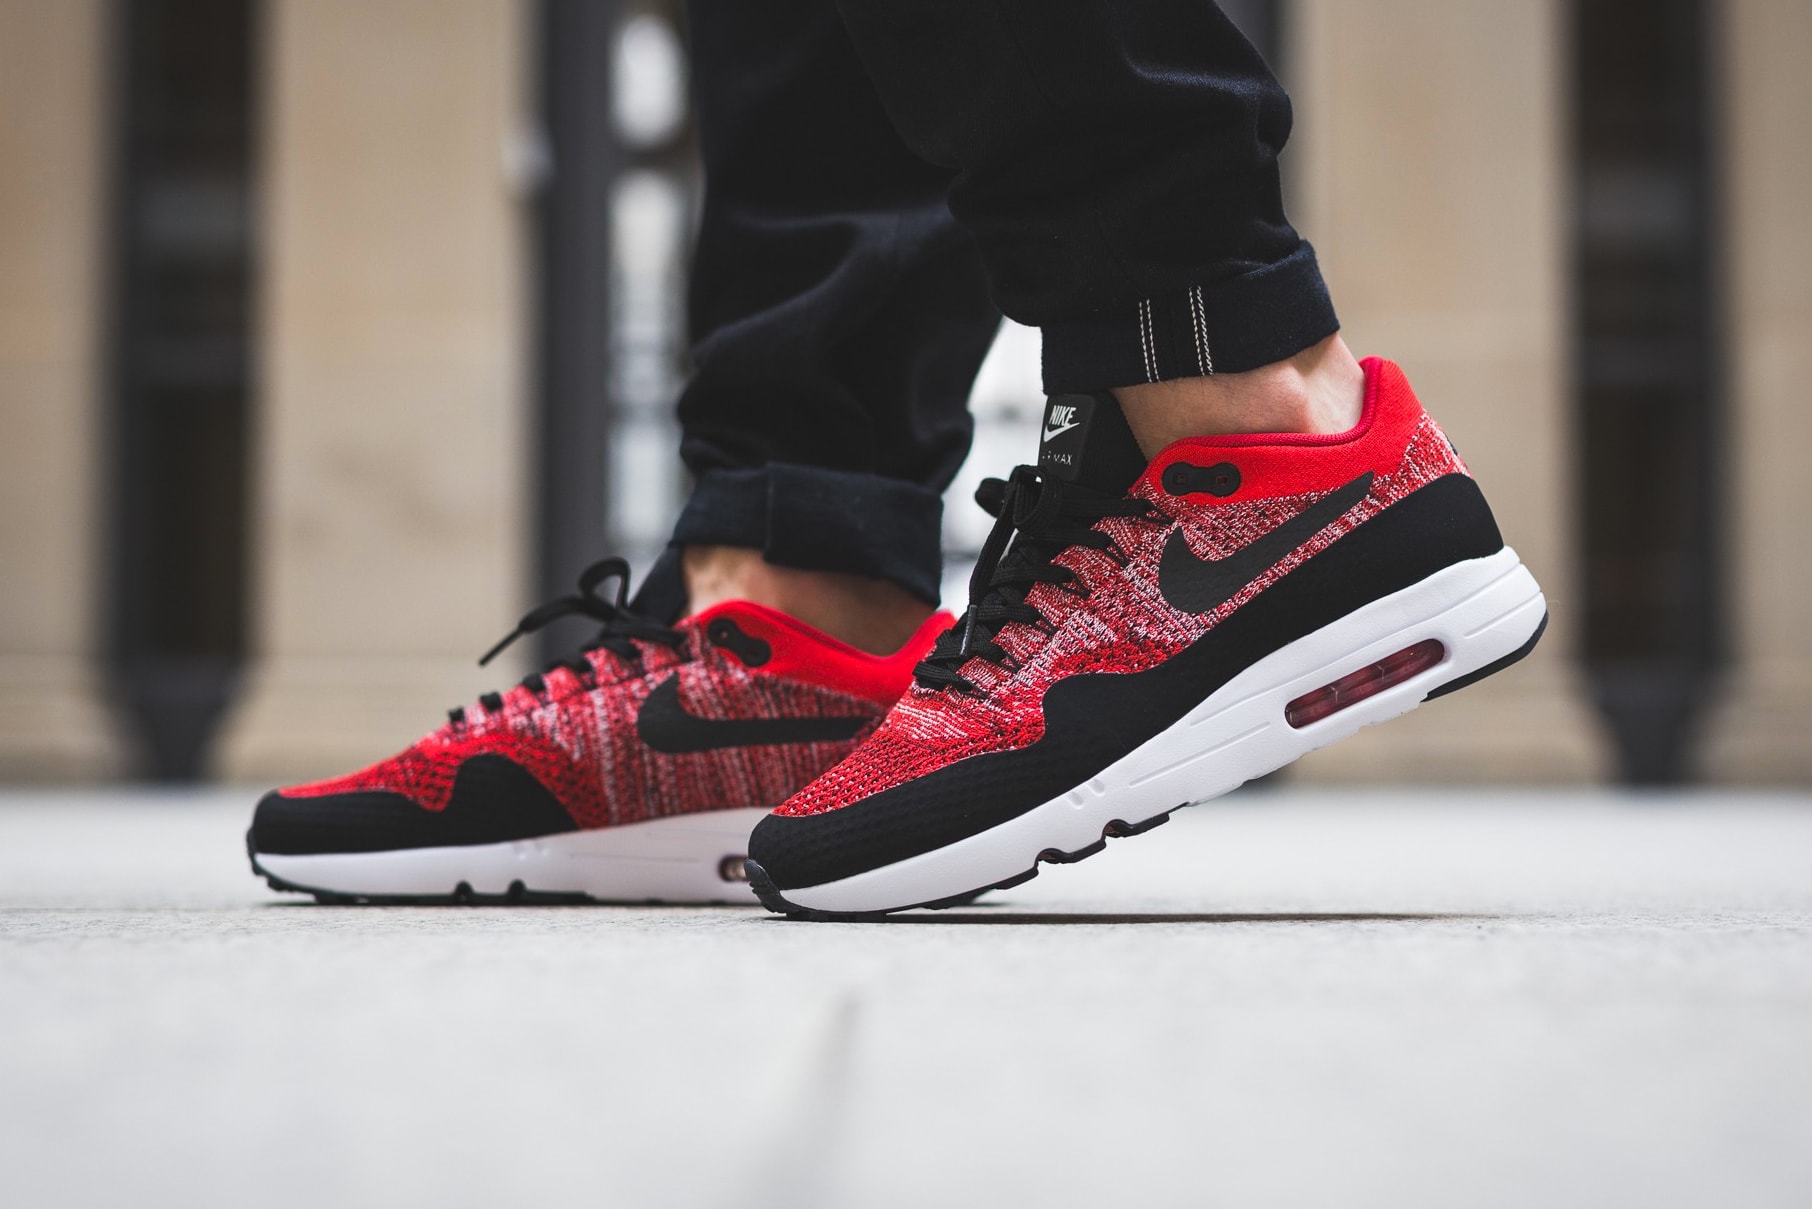 Nike Air Max 1 Ultra Flyknit 2.0 University Red Colorway